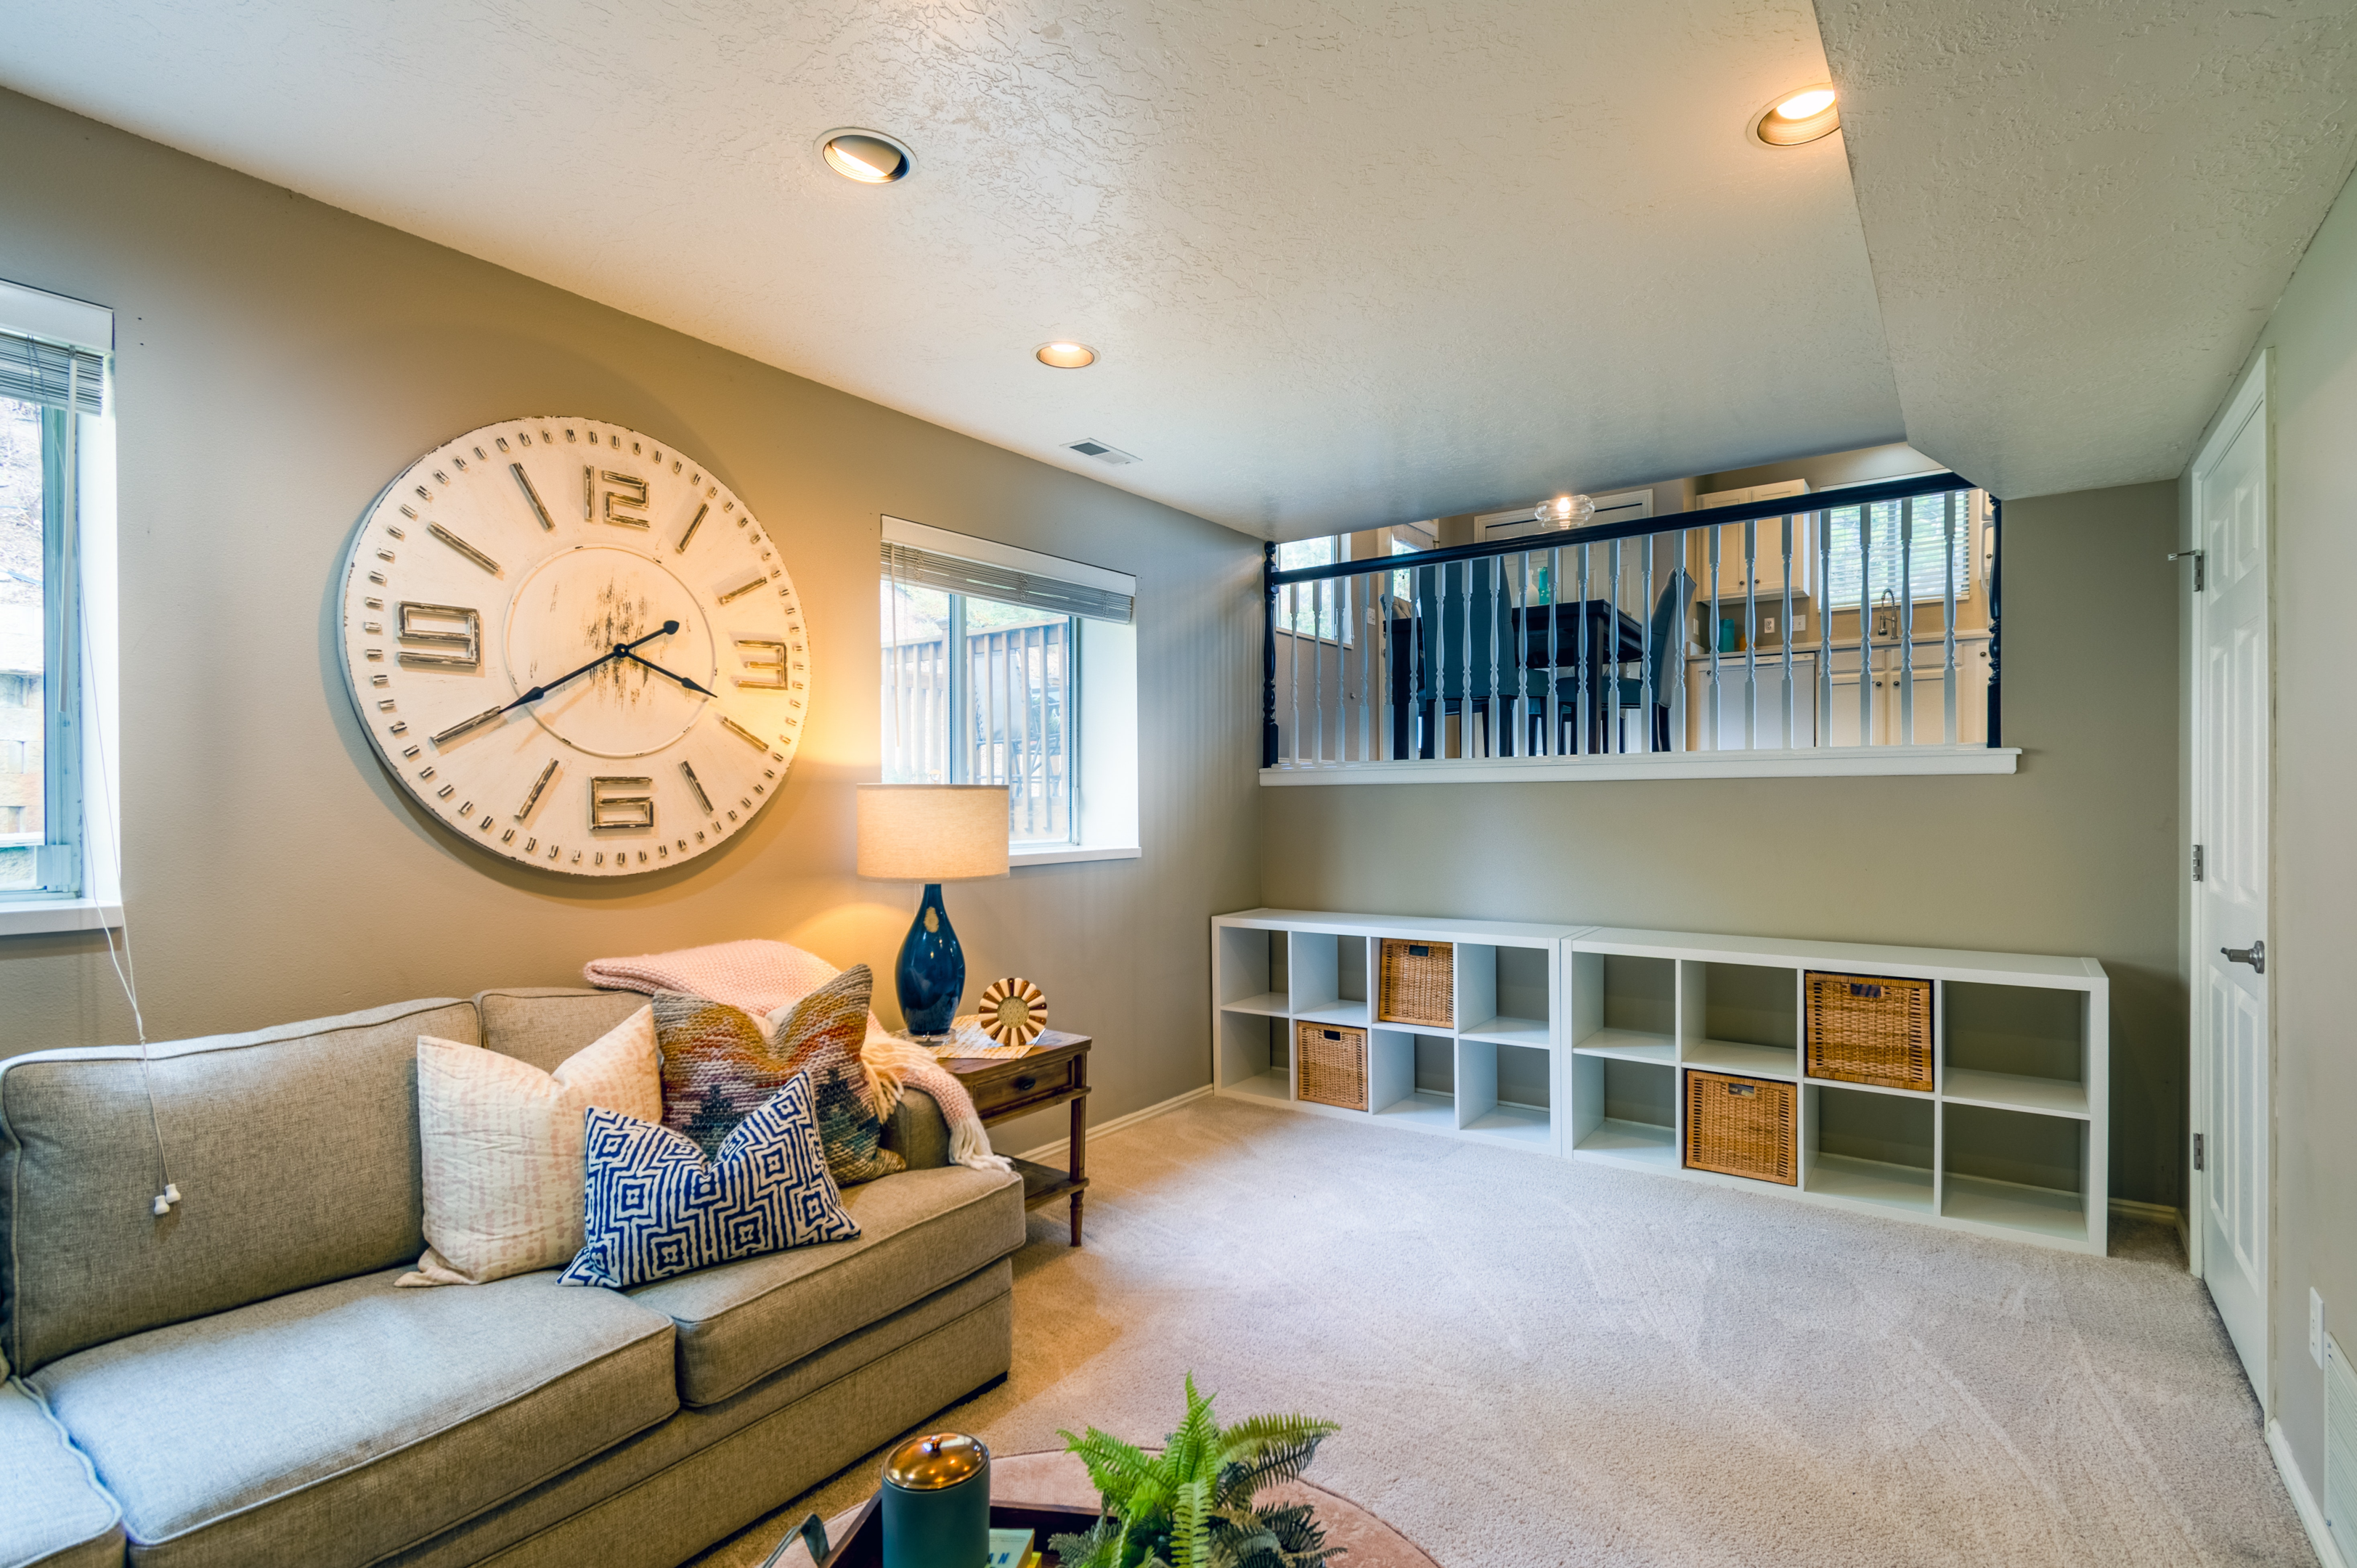 large wall clock and cubbies with baskets